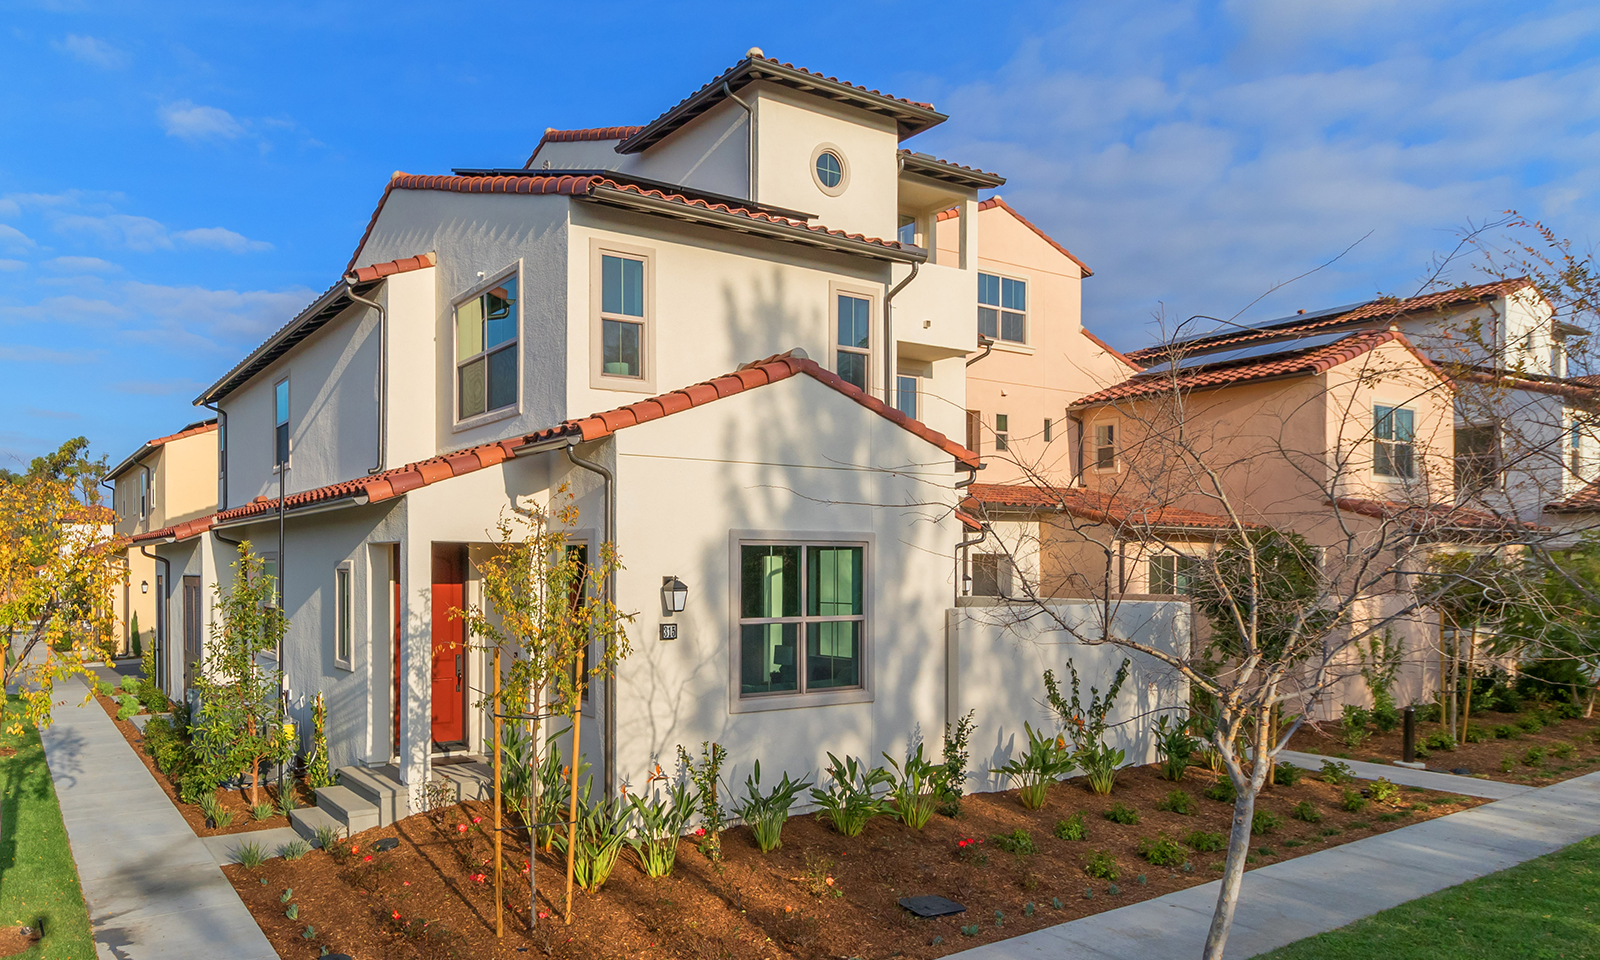 Irvine receives land to expand housing opportunities